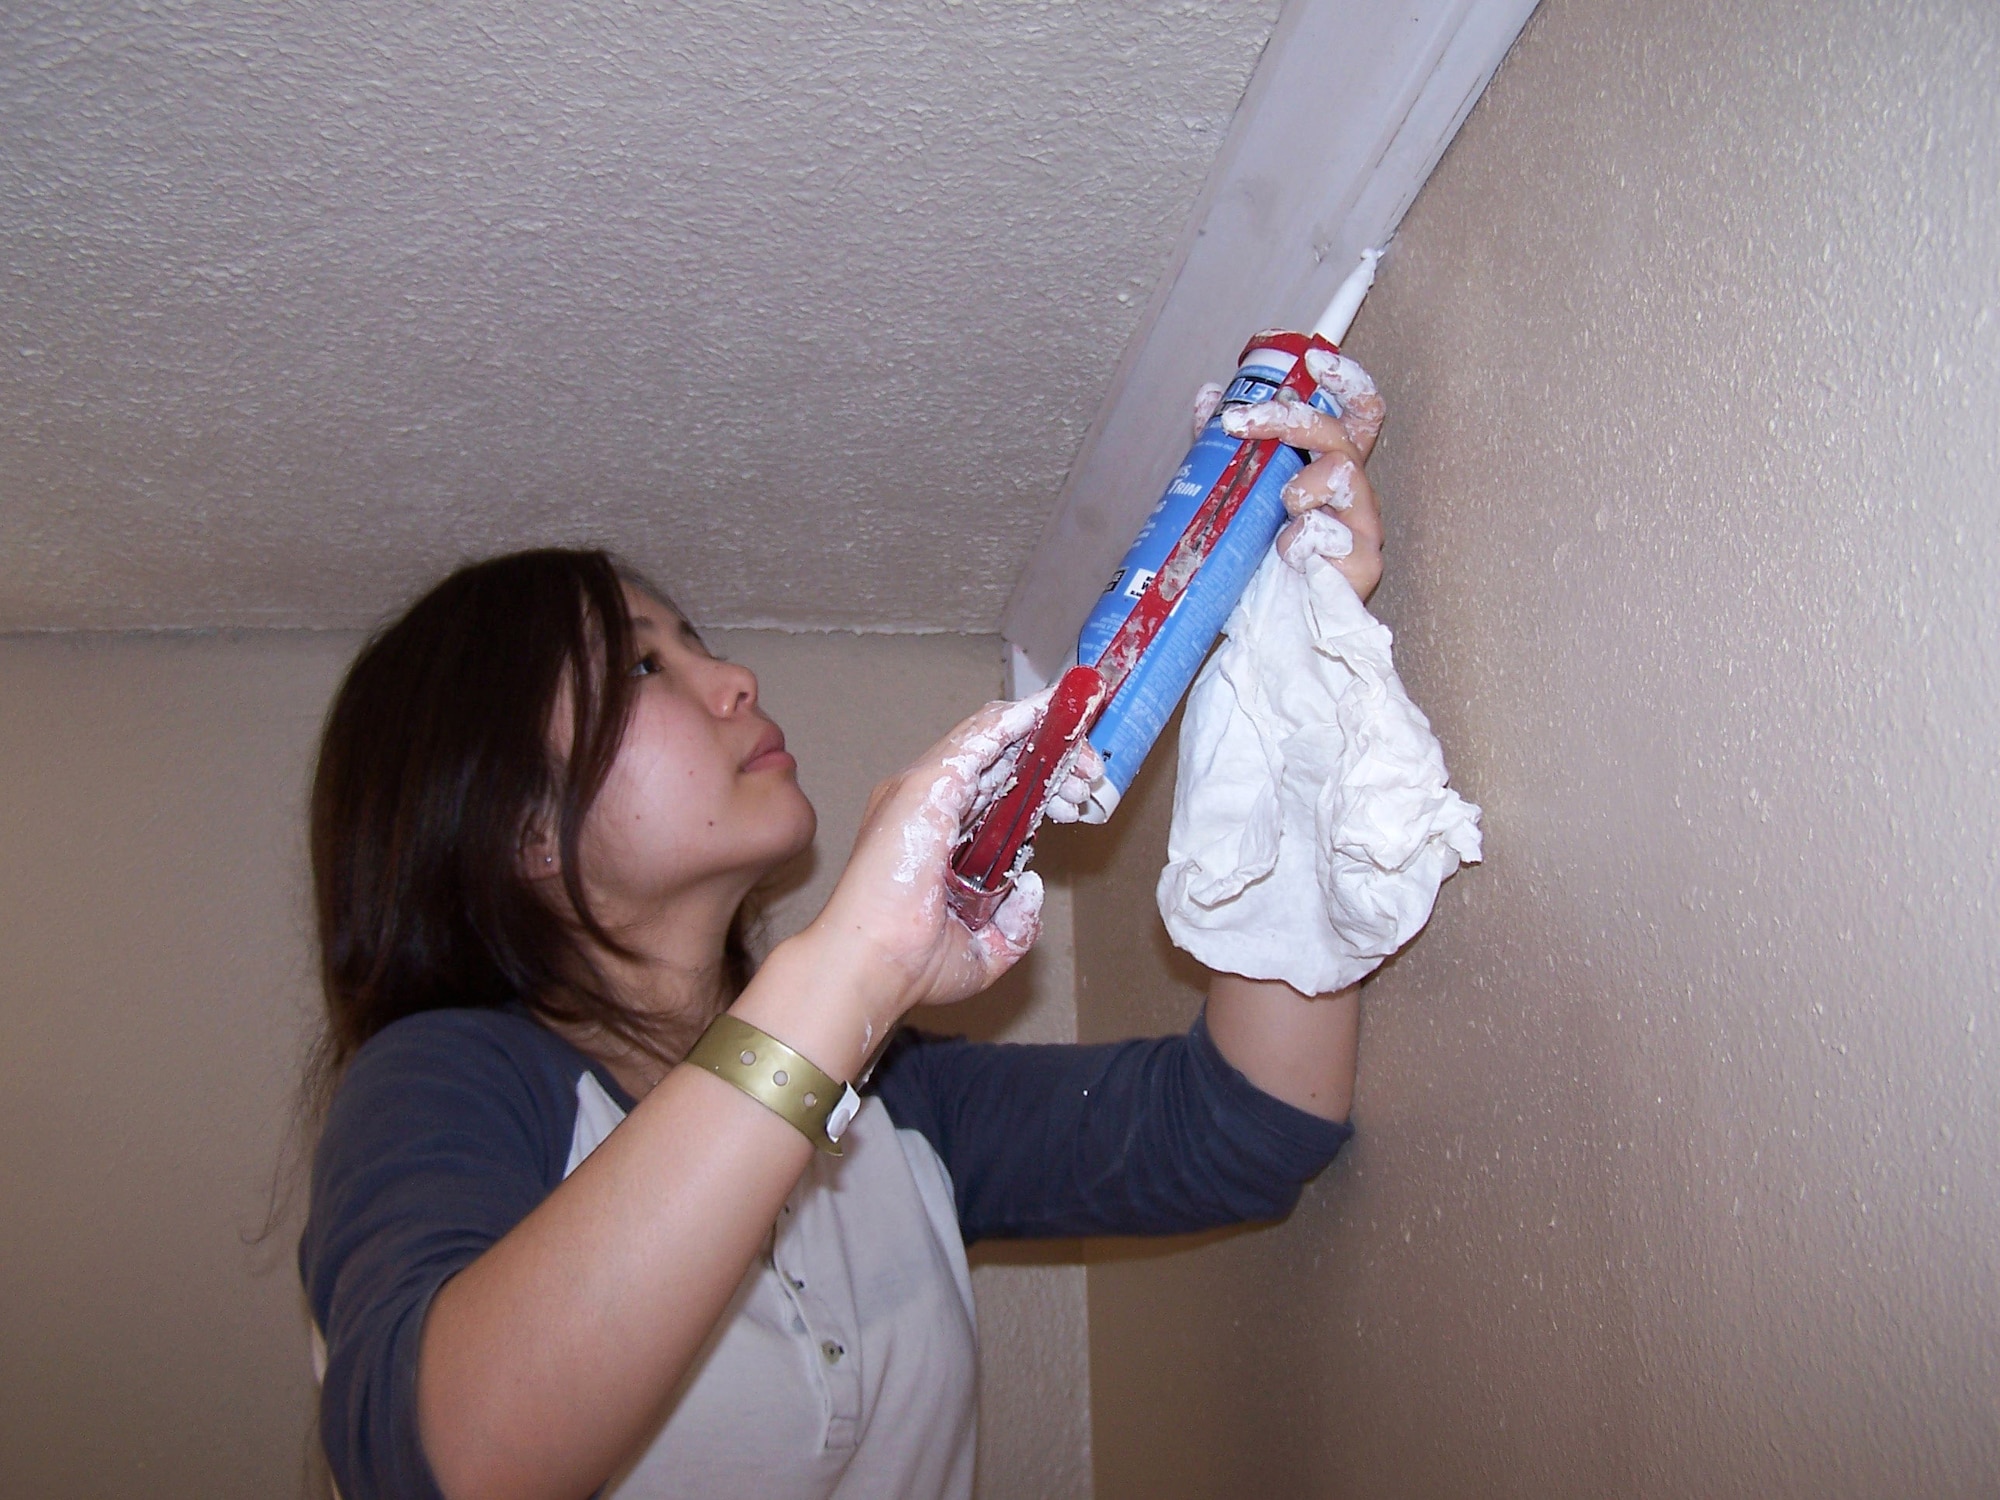 Senior Airman Thy Hoang applies caulking to wood trim in a home being restored in Bay St. Louis, Miss. The home was damaged by Hurricane Katrina more than a year ago. Airman Hoang is a 354th Medical Support Squadron pharmacy technician from Eielson Air Force Base, Alaska. She was one of five Airmen who travelled from Eielson AFB to the Gulf coast to repair Hurricane Katrina-damaged homes. (U.S. Air Force photo/Senior Airman Anthony Nelson)